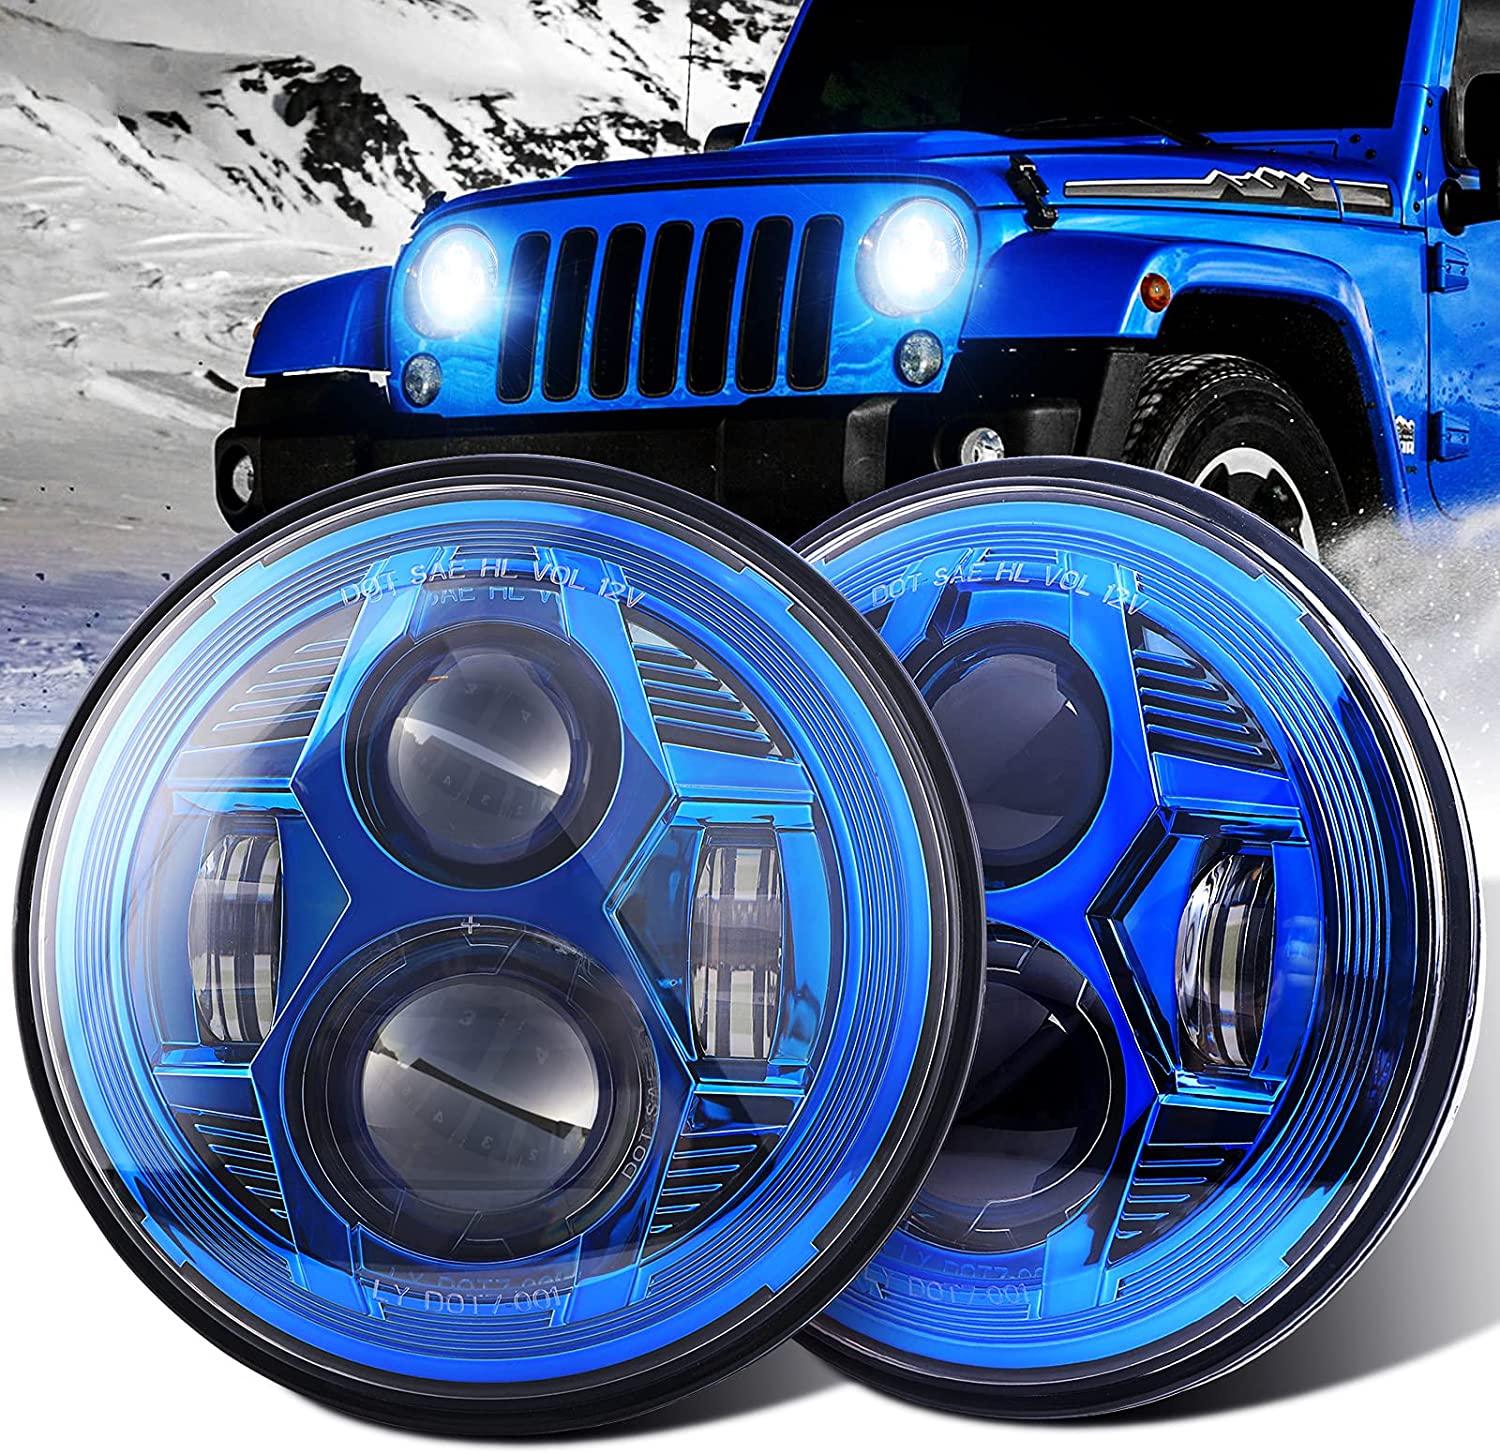 LED Headlight 7 inch Blue with projector for Jeep Wrangler